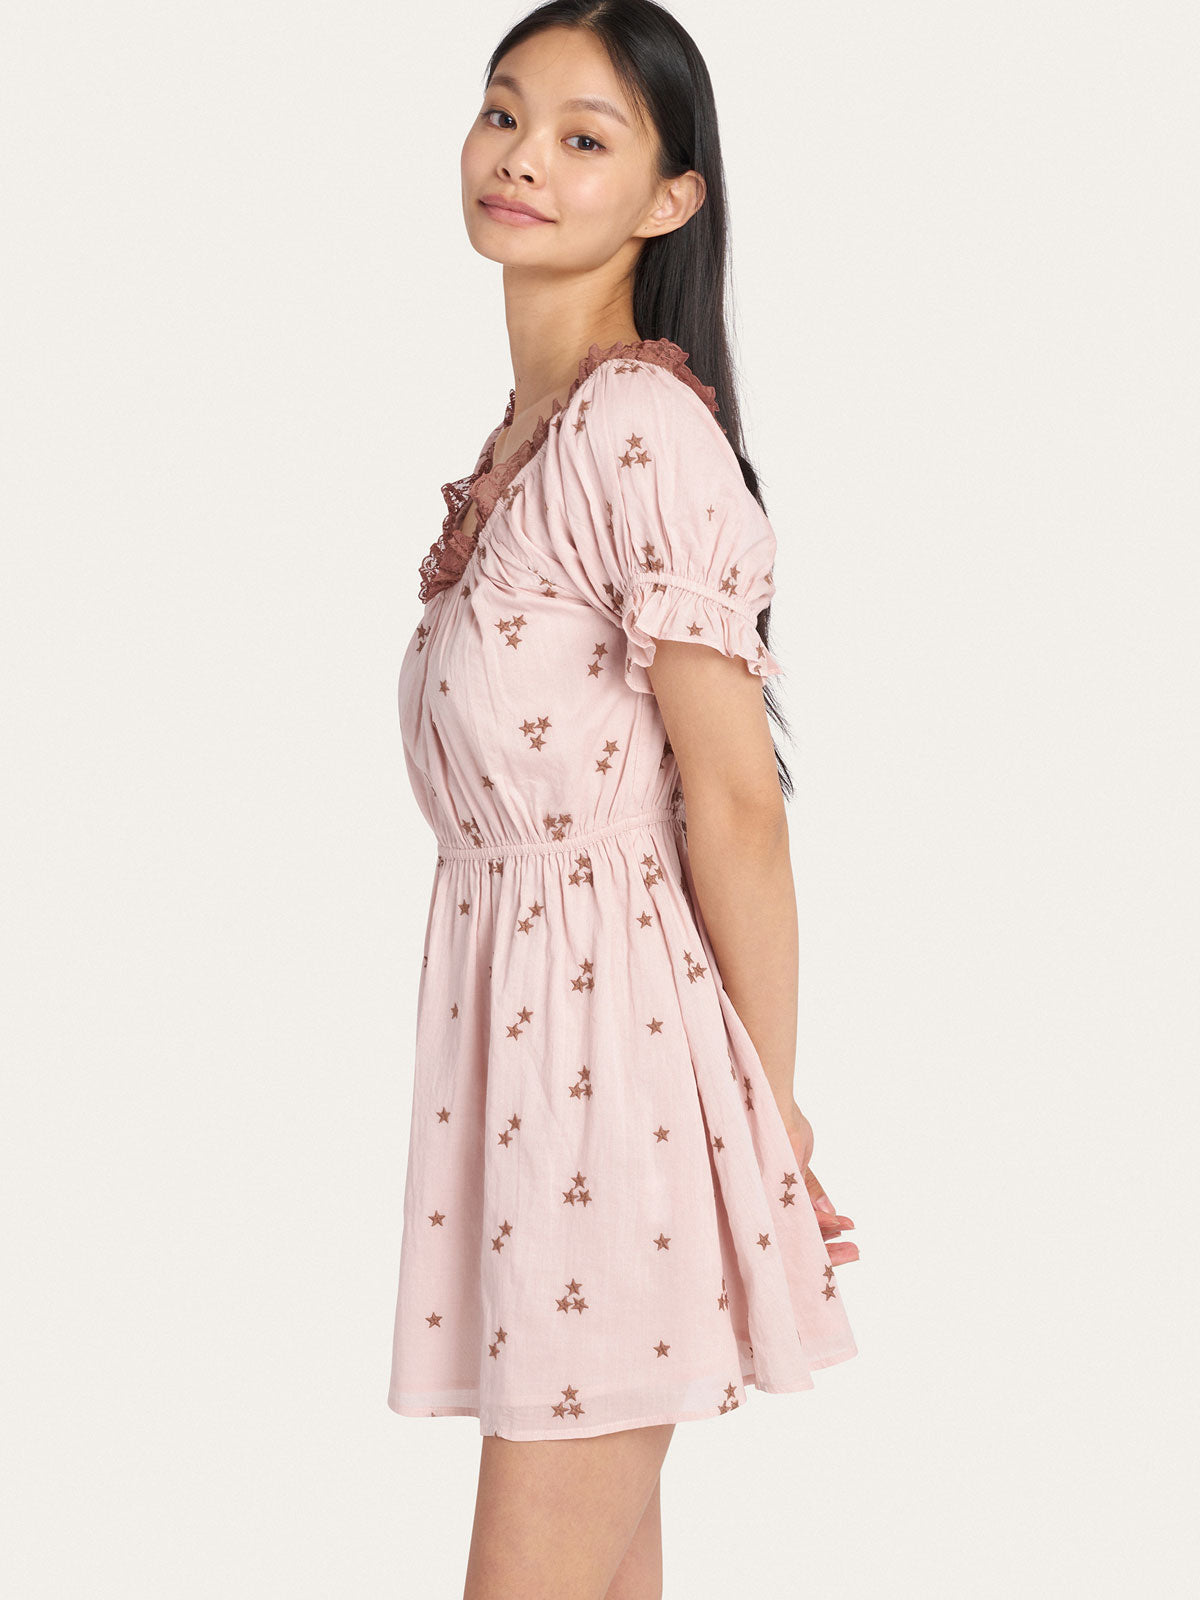 Ava Dress in Starry Day By Morgan Lane